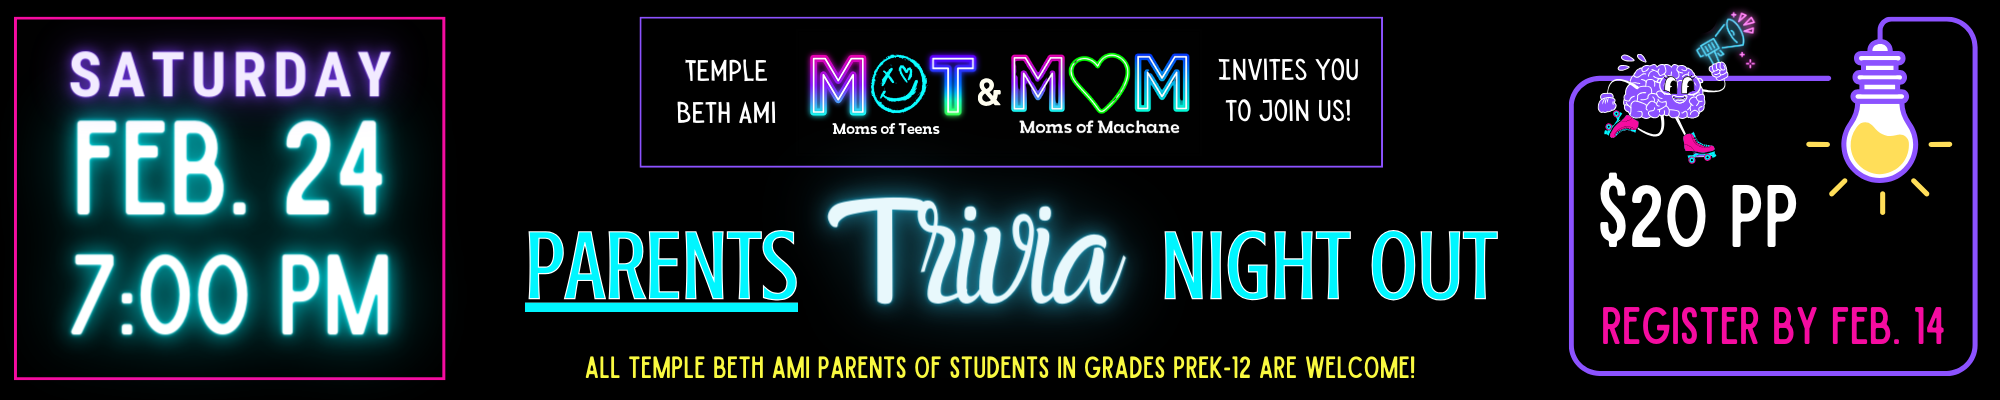 Parents Night Out Trivia Night Out Home Page Slider (2000 x 400 px)